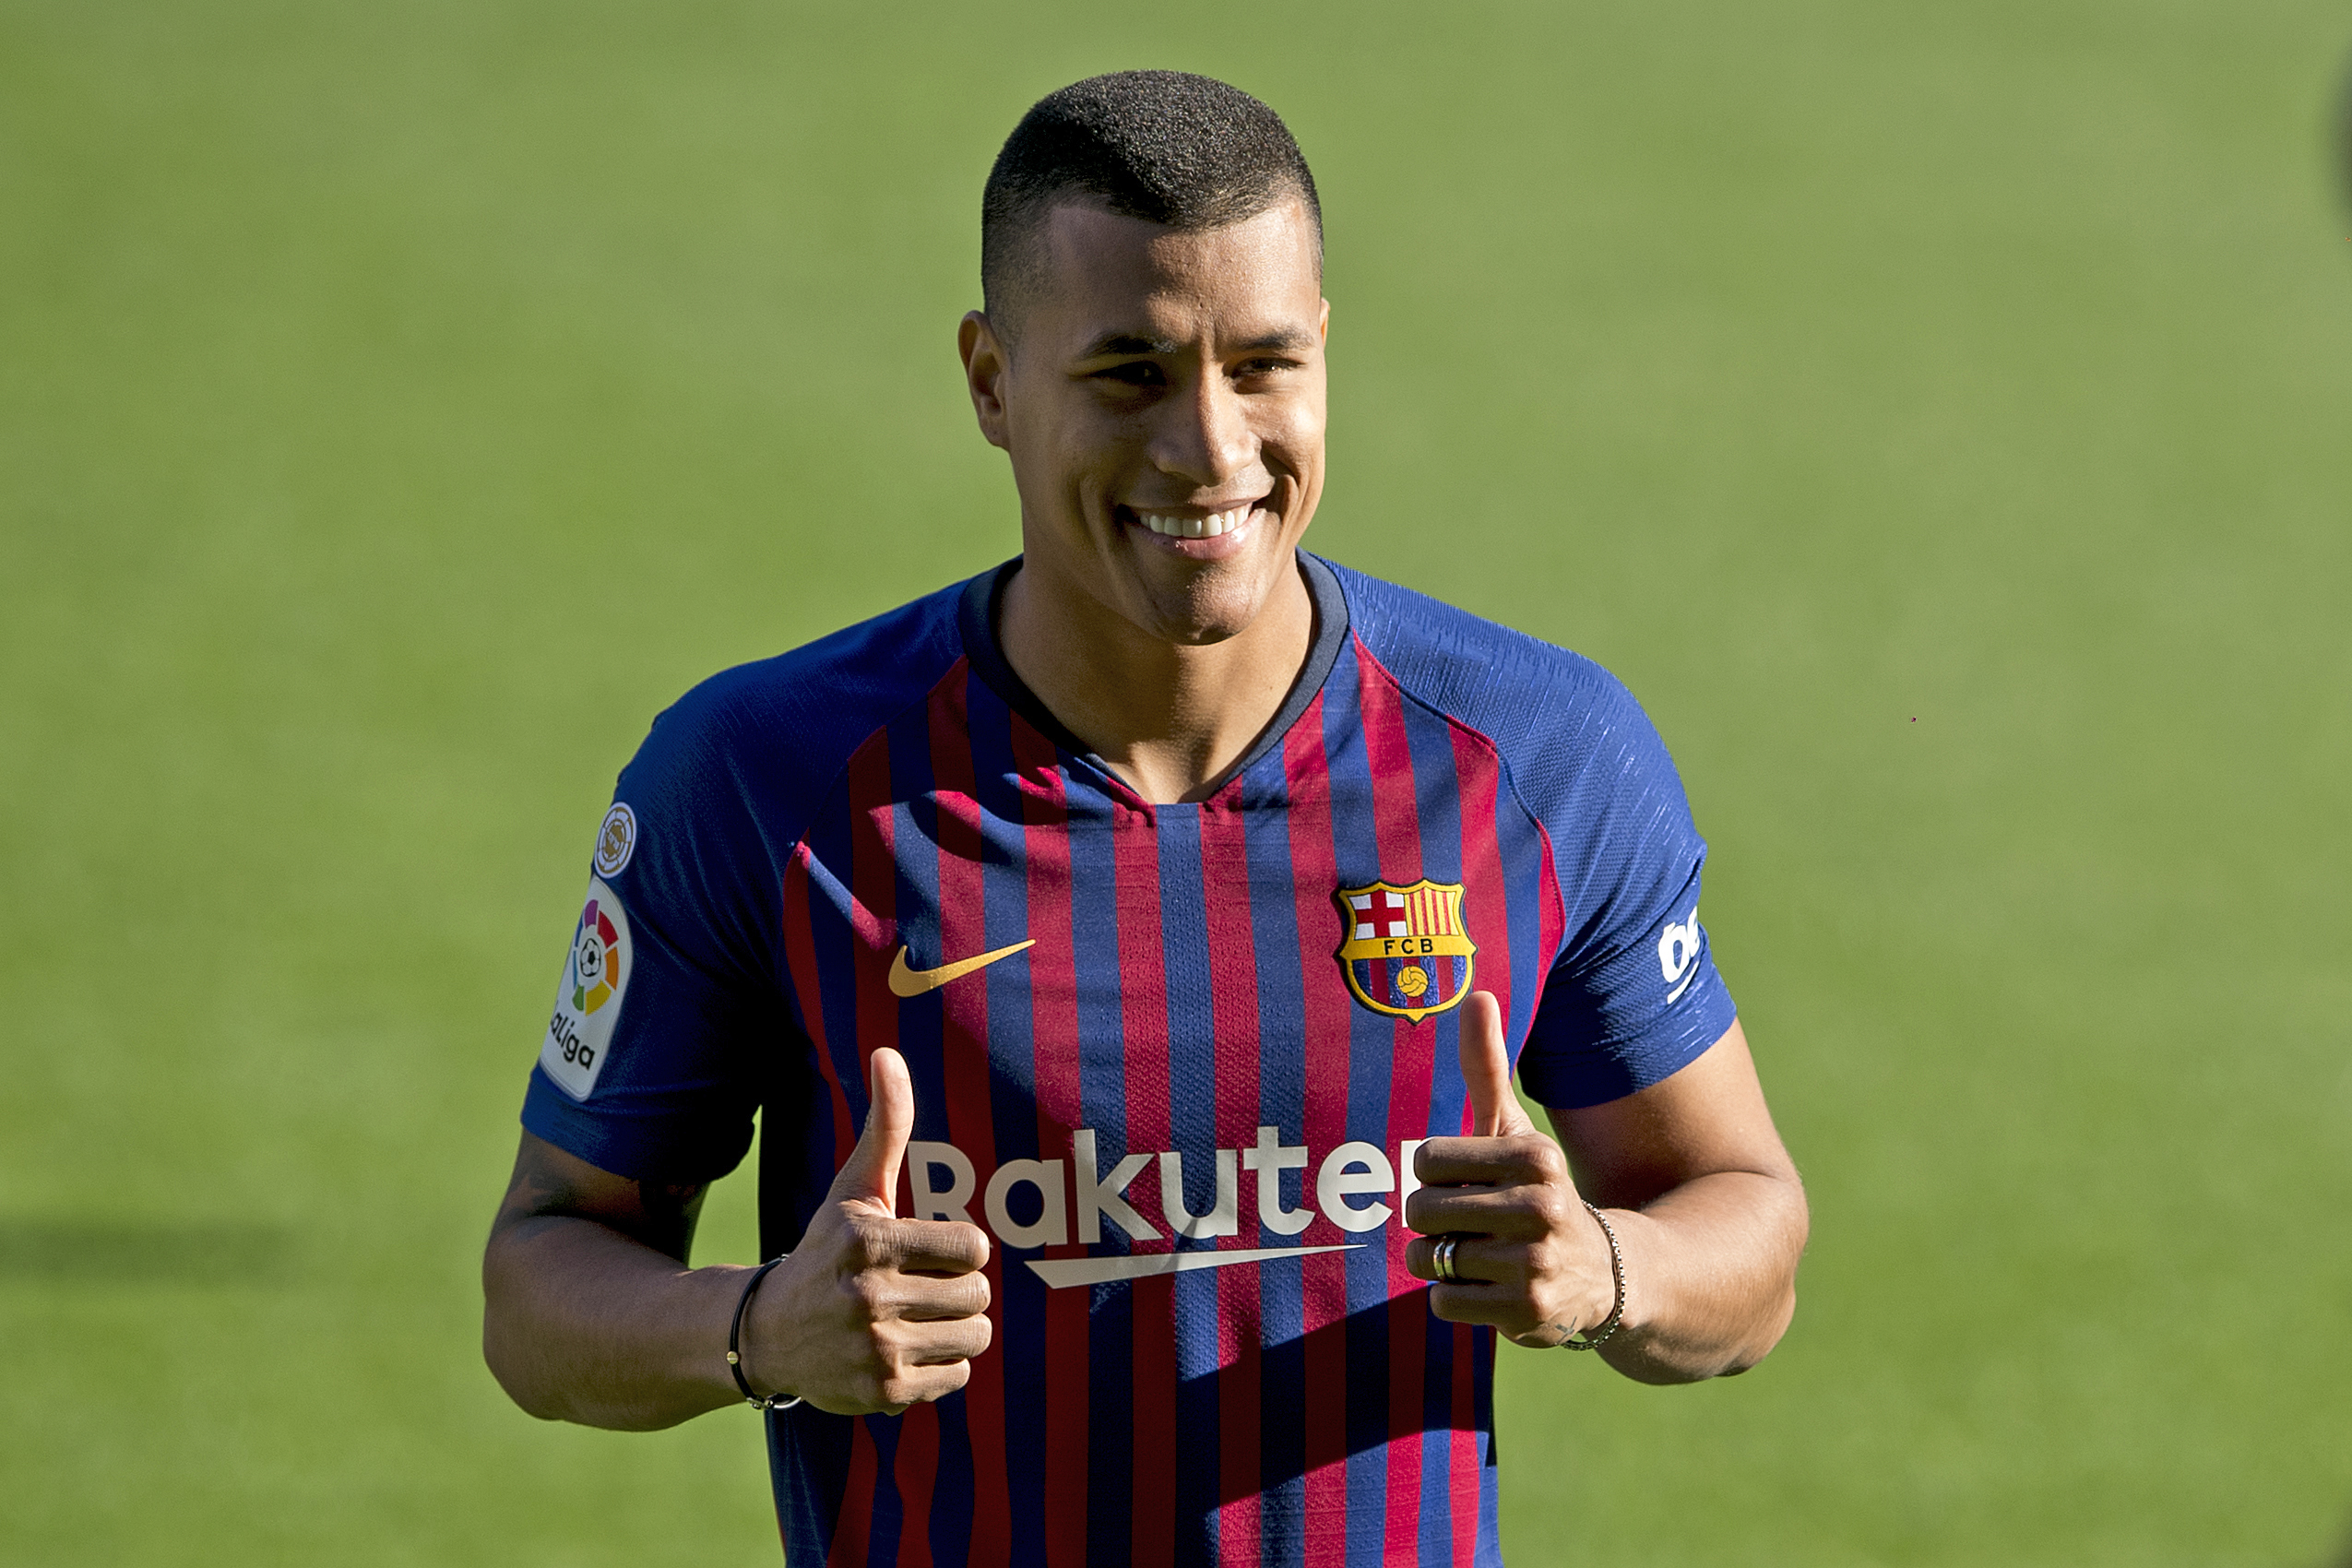 Barcelona's new player Colombian defender Jeison Murillo gives thumbs up during his official presentation at the Camp Nou stadium in Barcelona on December 27, 2018. (Photo by Josep LAGO / AFP)        (Photo credit should read JOSEP LAGO/AFP/Getty Images)